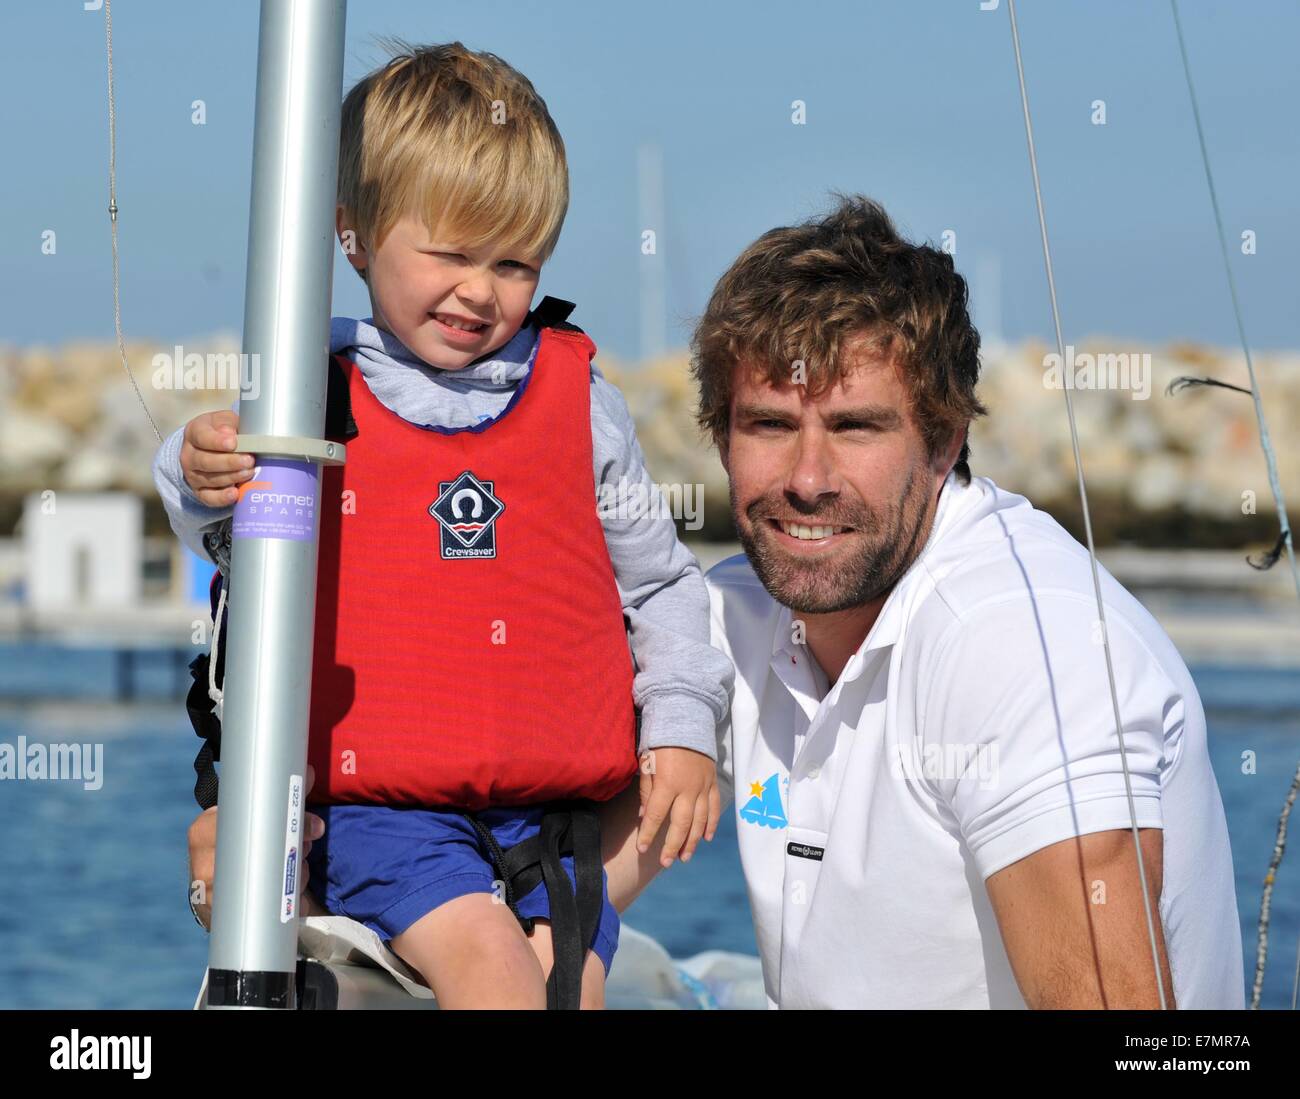 Portland, UK. 21st Sep, 2014. Bart's Bash at the National Sailing Academy at Portland in Dorset. Andrew Simpson's Olympic sailing buddy Iain Percy with Andrew's son Freddie as they are about to leave to take part in the largest yacht race in the world today (Sunday 21st Sept) sailing in his 'Star Class' yacht that they won a silver medal in at London 2012. The event is a huge charity one in response to Andrew's sudden death whilst sailing in an America's cup yacht. 21st September, 2014 Picture:  Credit:  Dorset Media Service/Alamy Live News Stock Photo